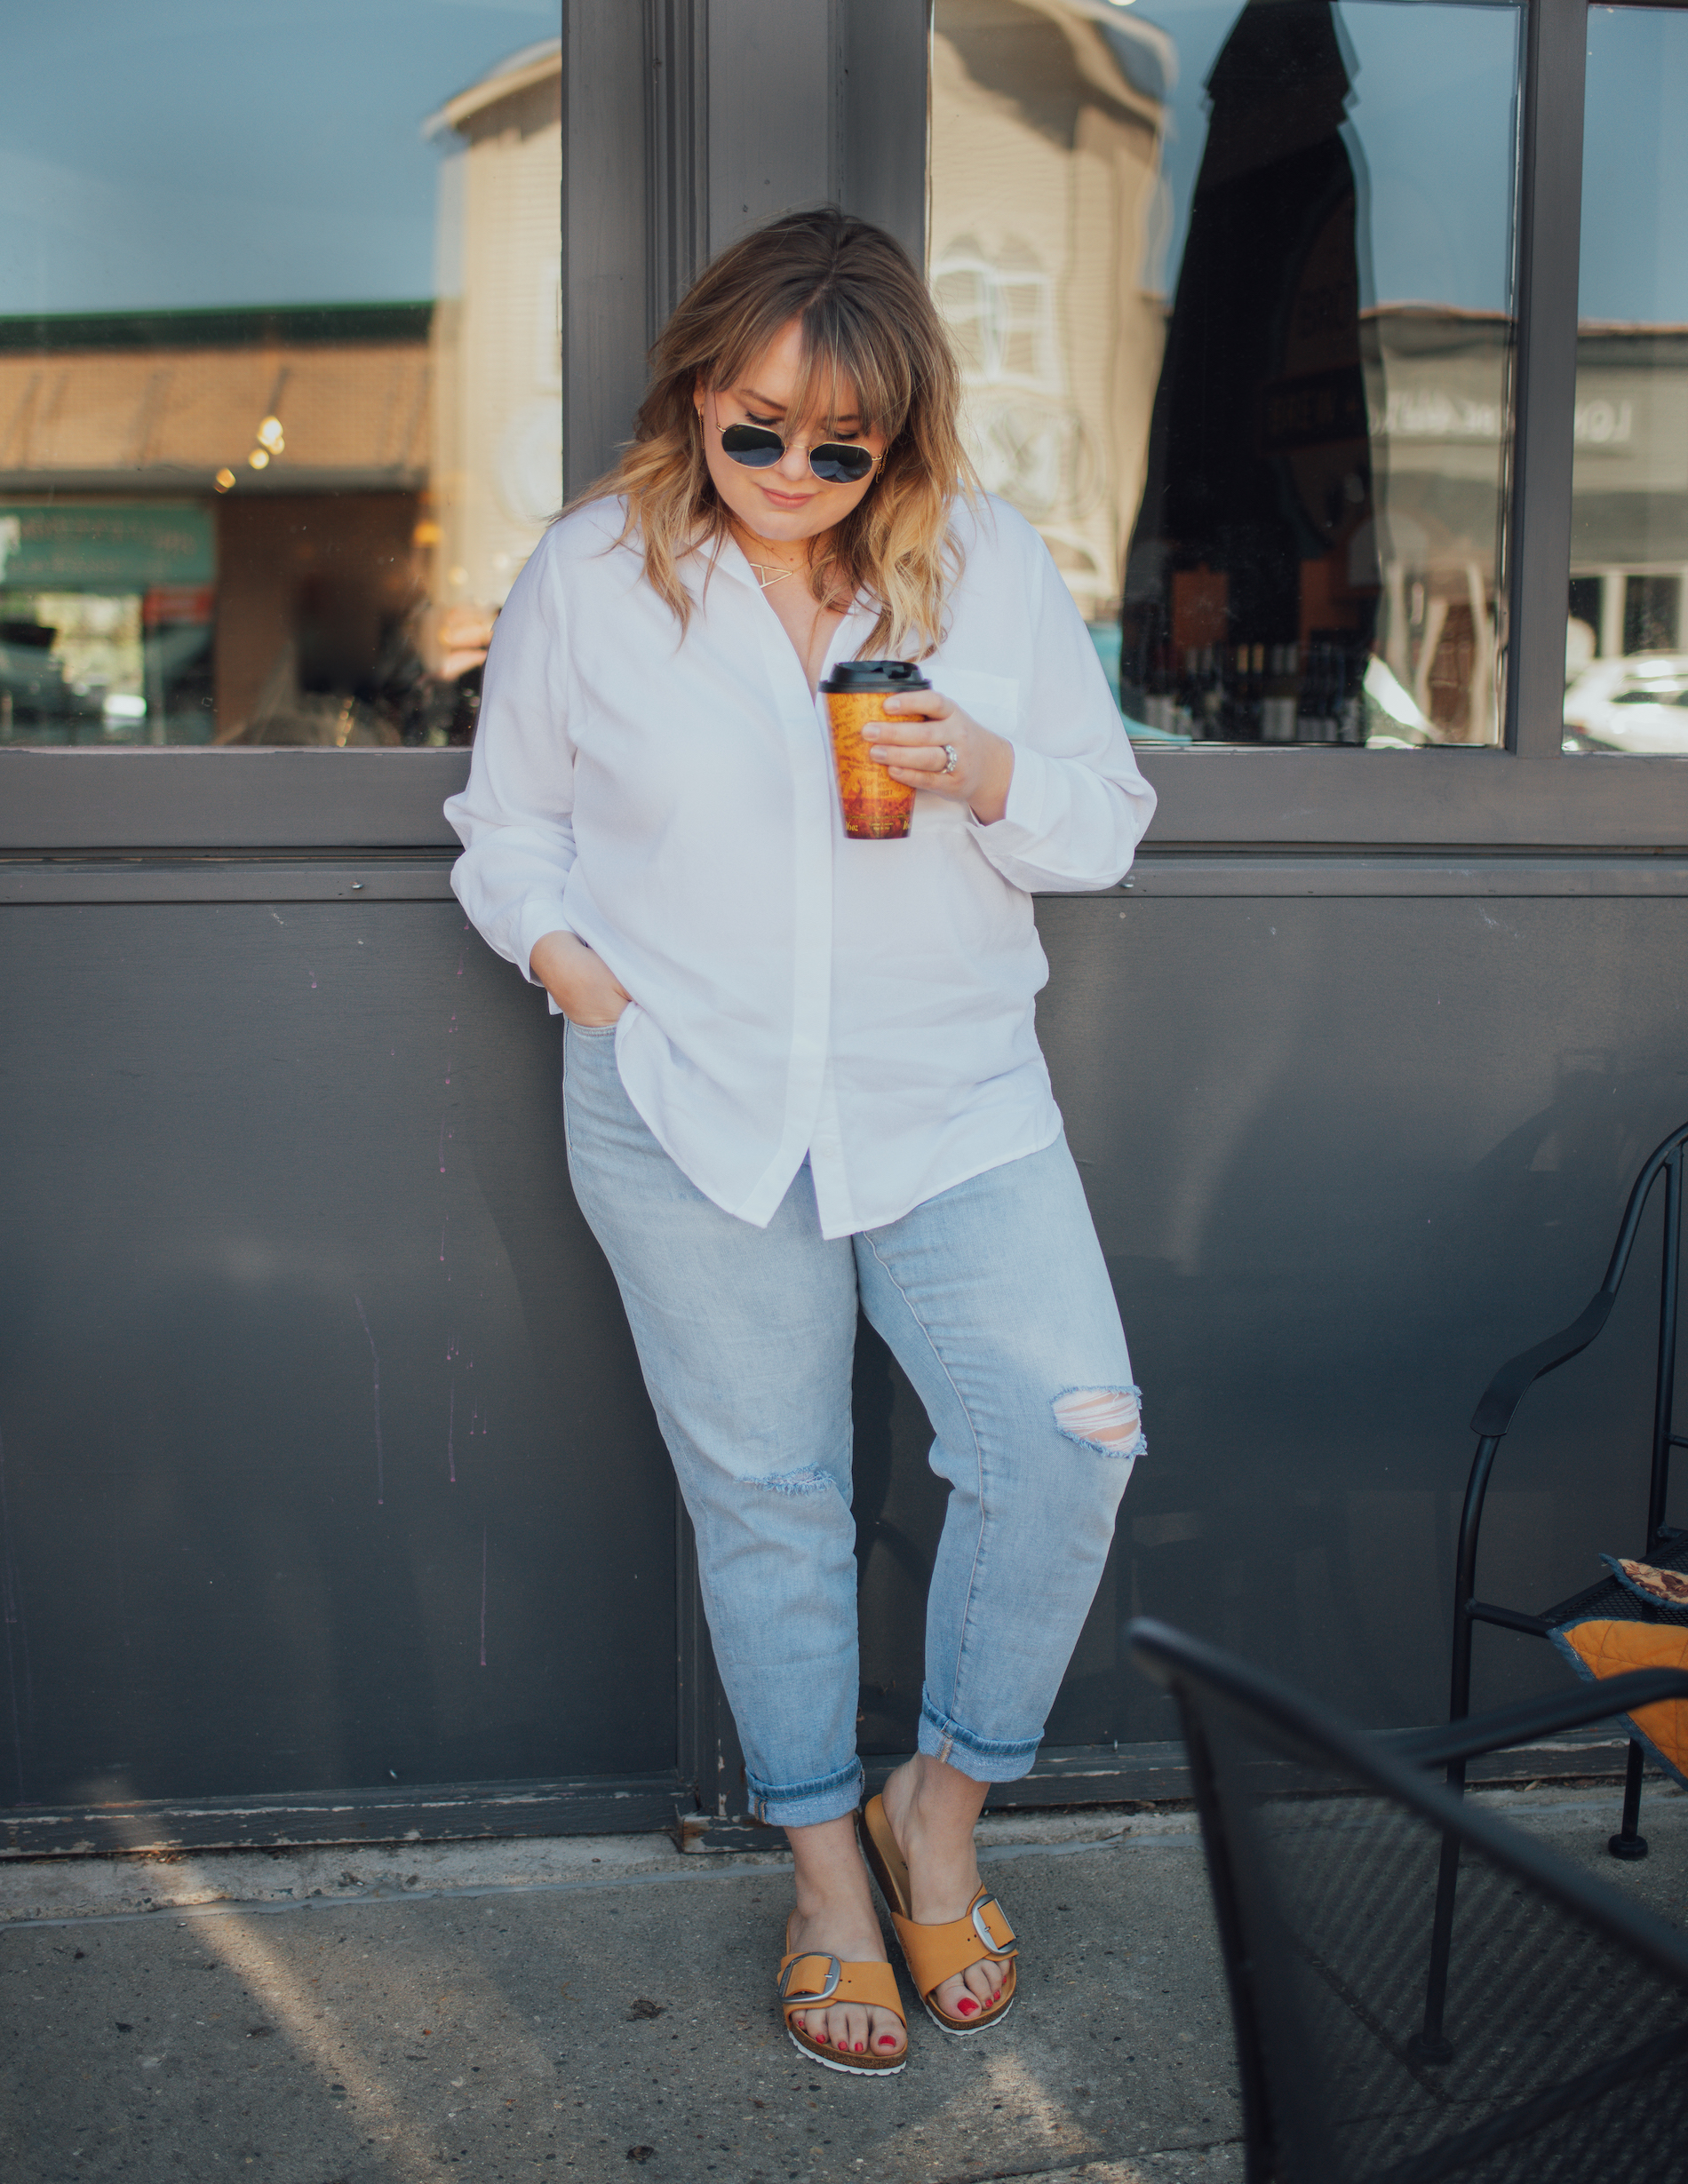 Sharing a casual spring outfit from Anthropologie plus size selection! Styling some Madrid Birkenstocks from Anthro. 